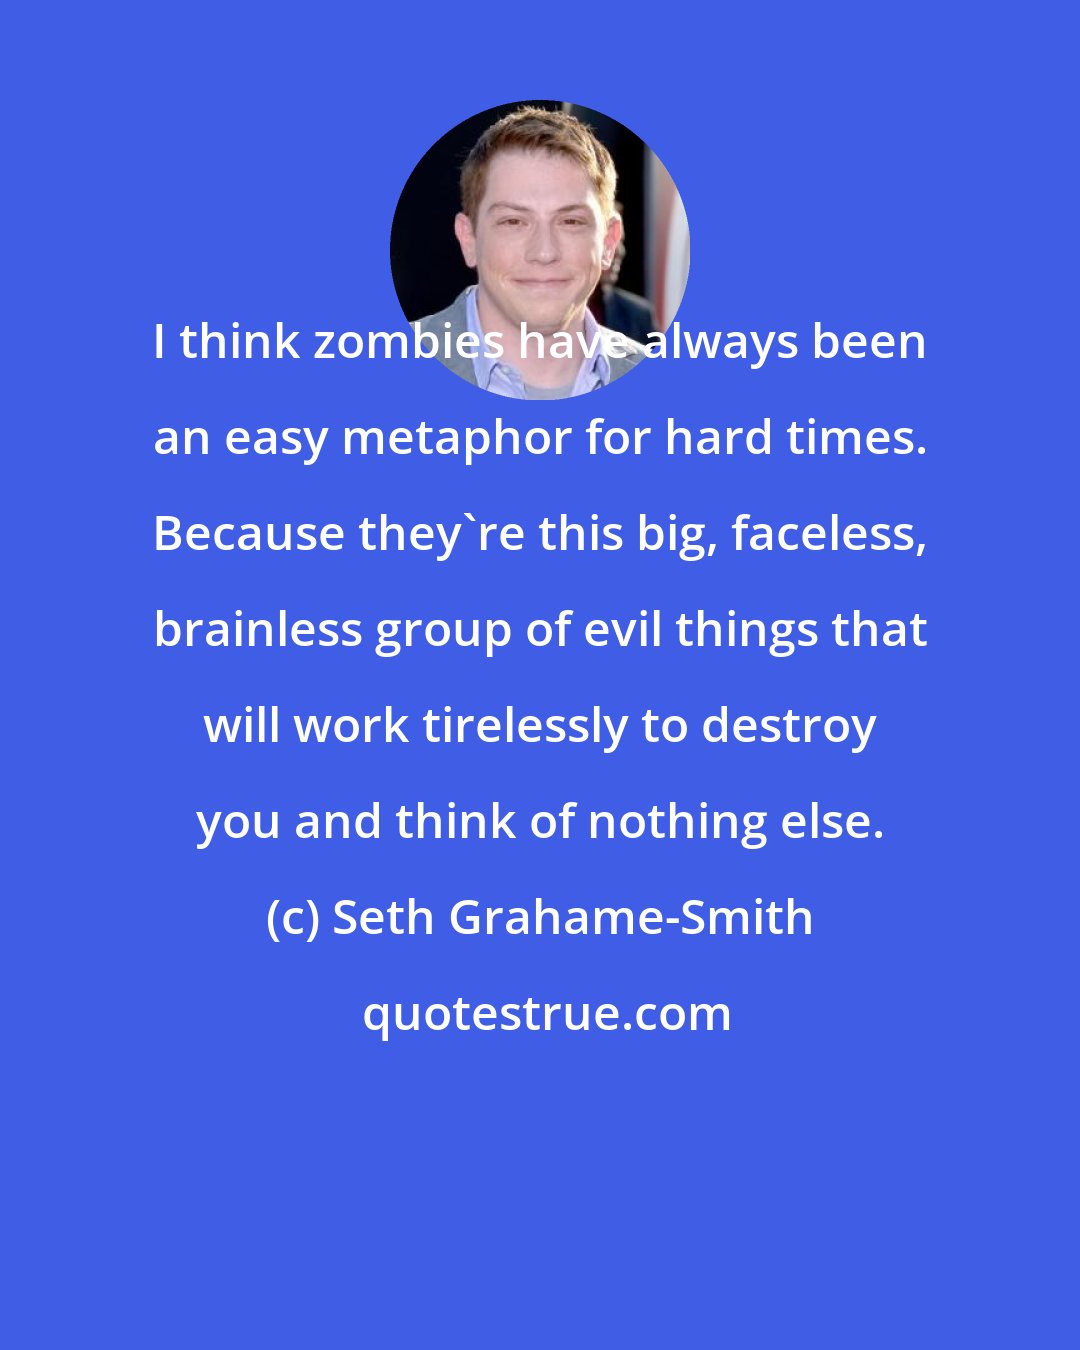 Seth Grahame-Smith: I think zombies have always been an easy metaphor for hard times. Because they're this big, faceless, brainless group of evil things that will work tirelessly to destroy you and think of nothing else.